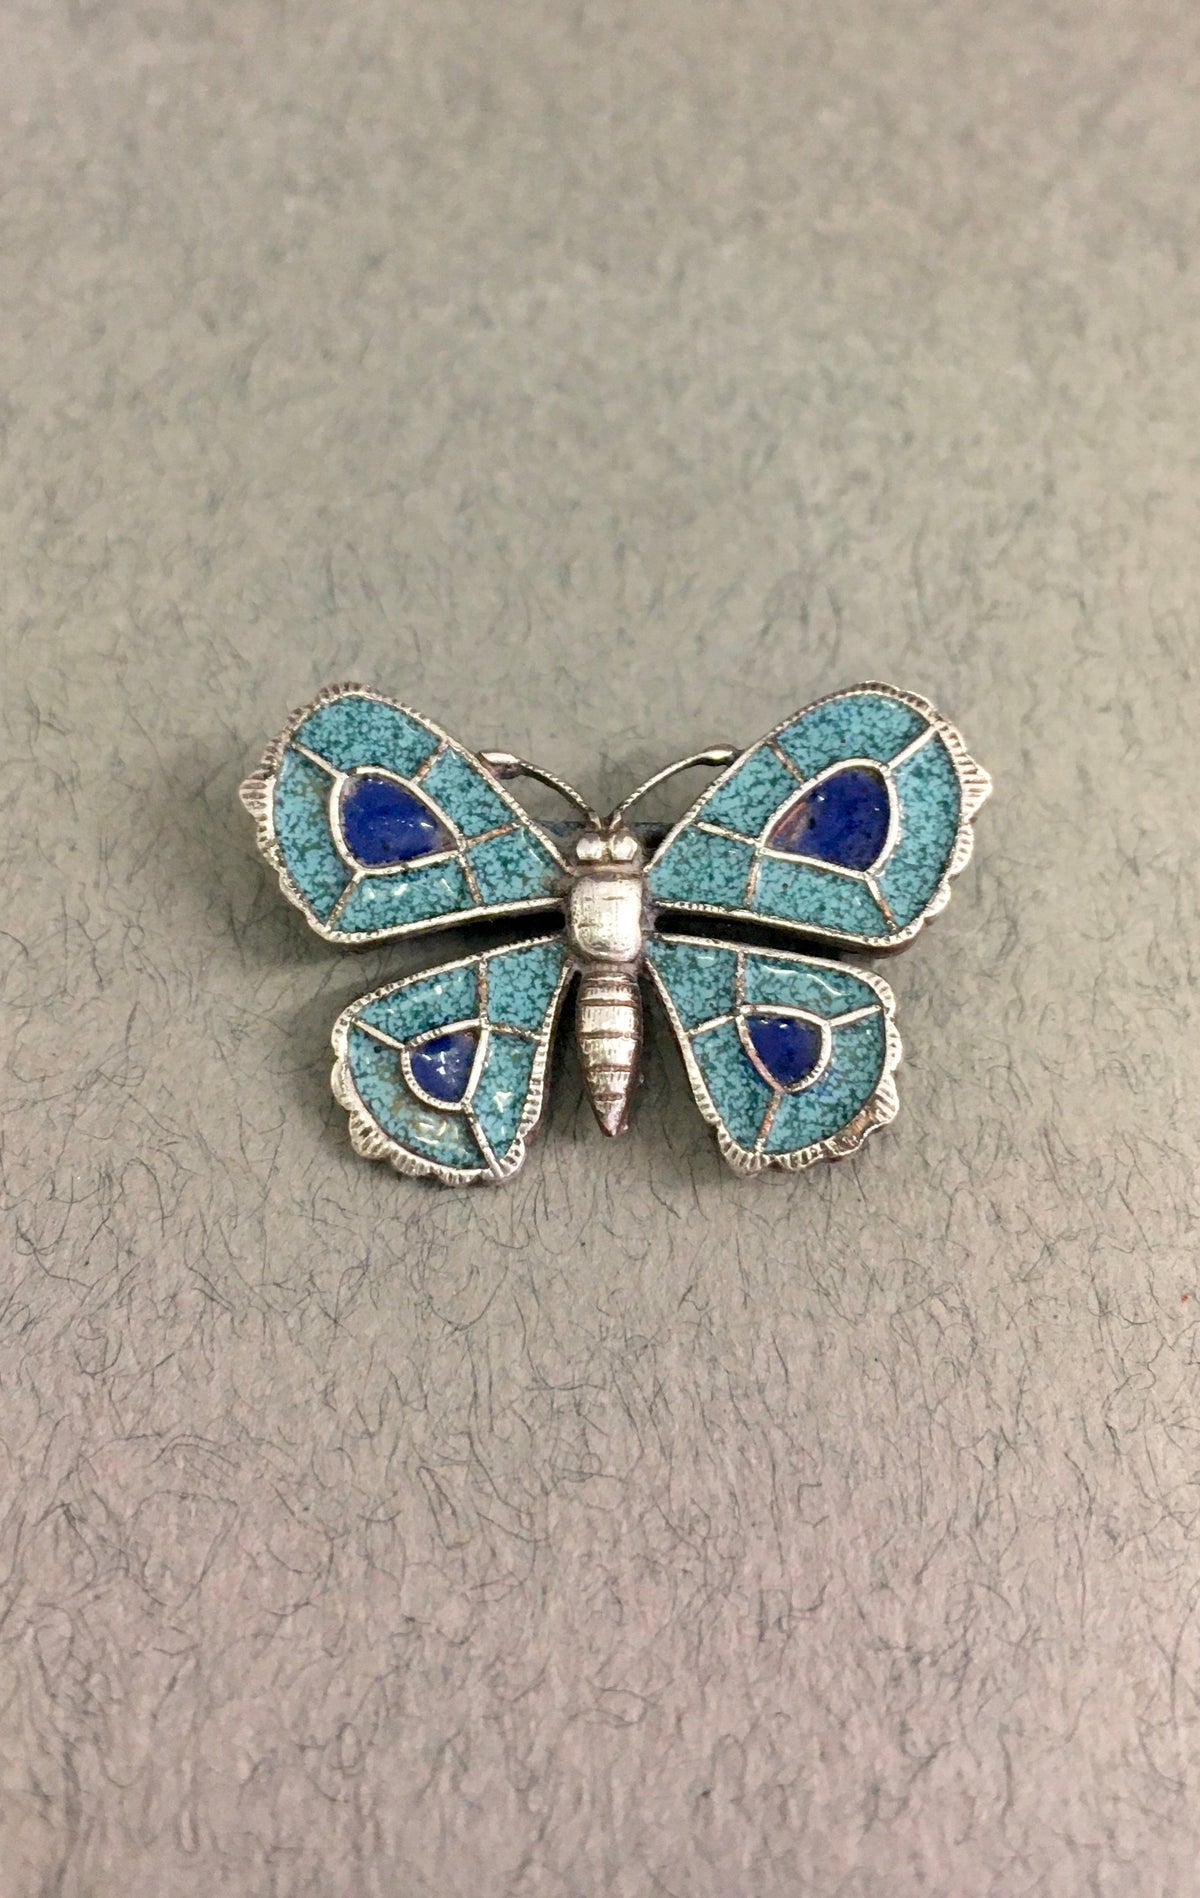 Turquoise and Cobalt Blue Enamel Butterfly Brooch by Jess Lelong